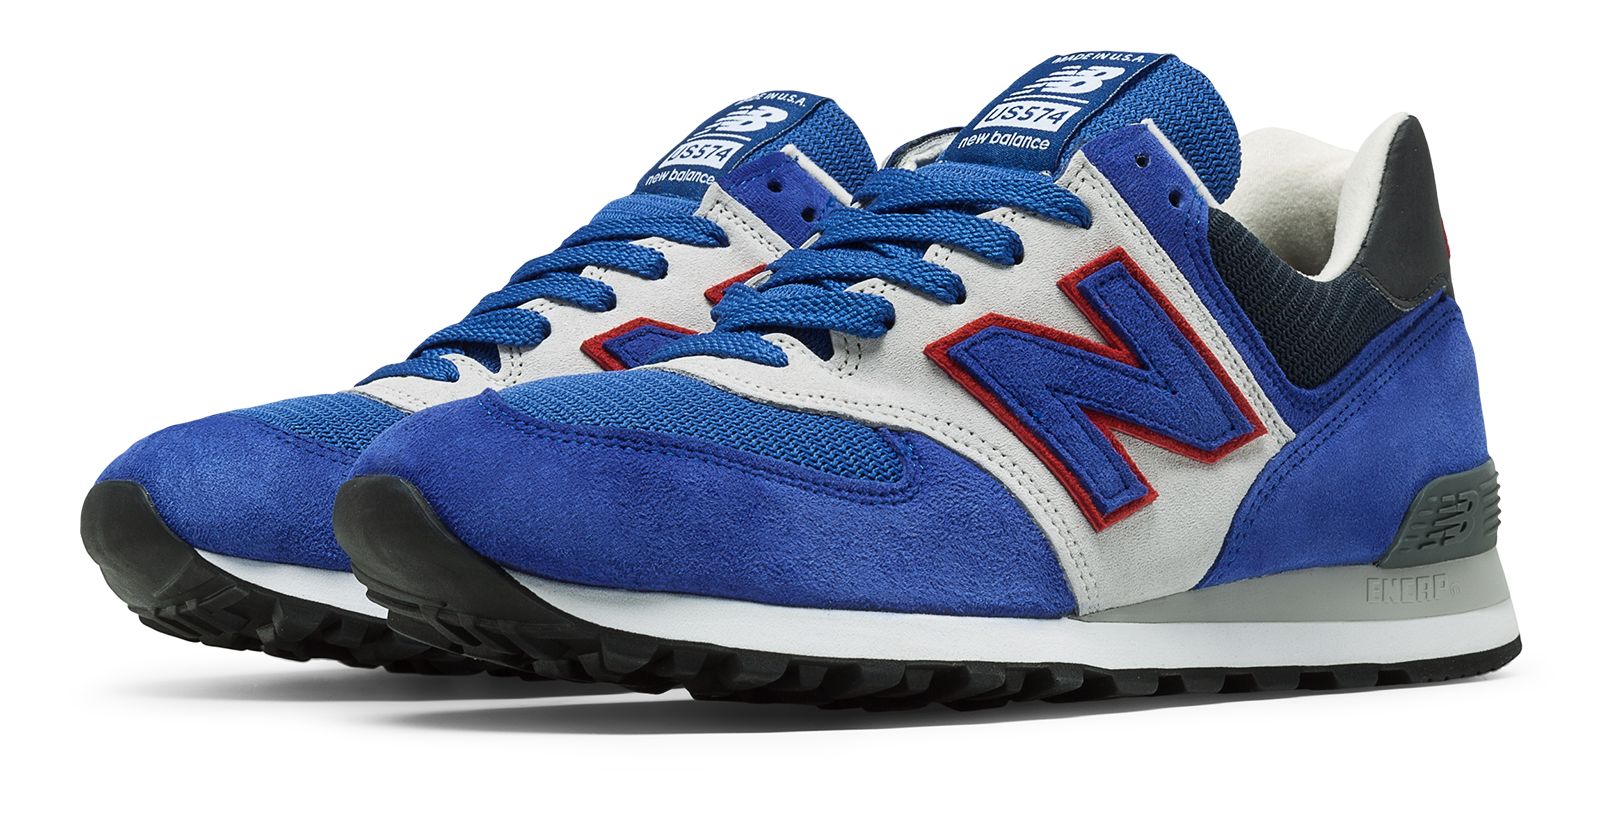 Men's Casual Shoes - Sneakers for Men - New Balance